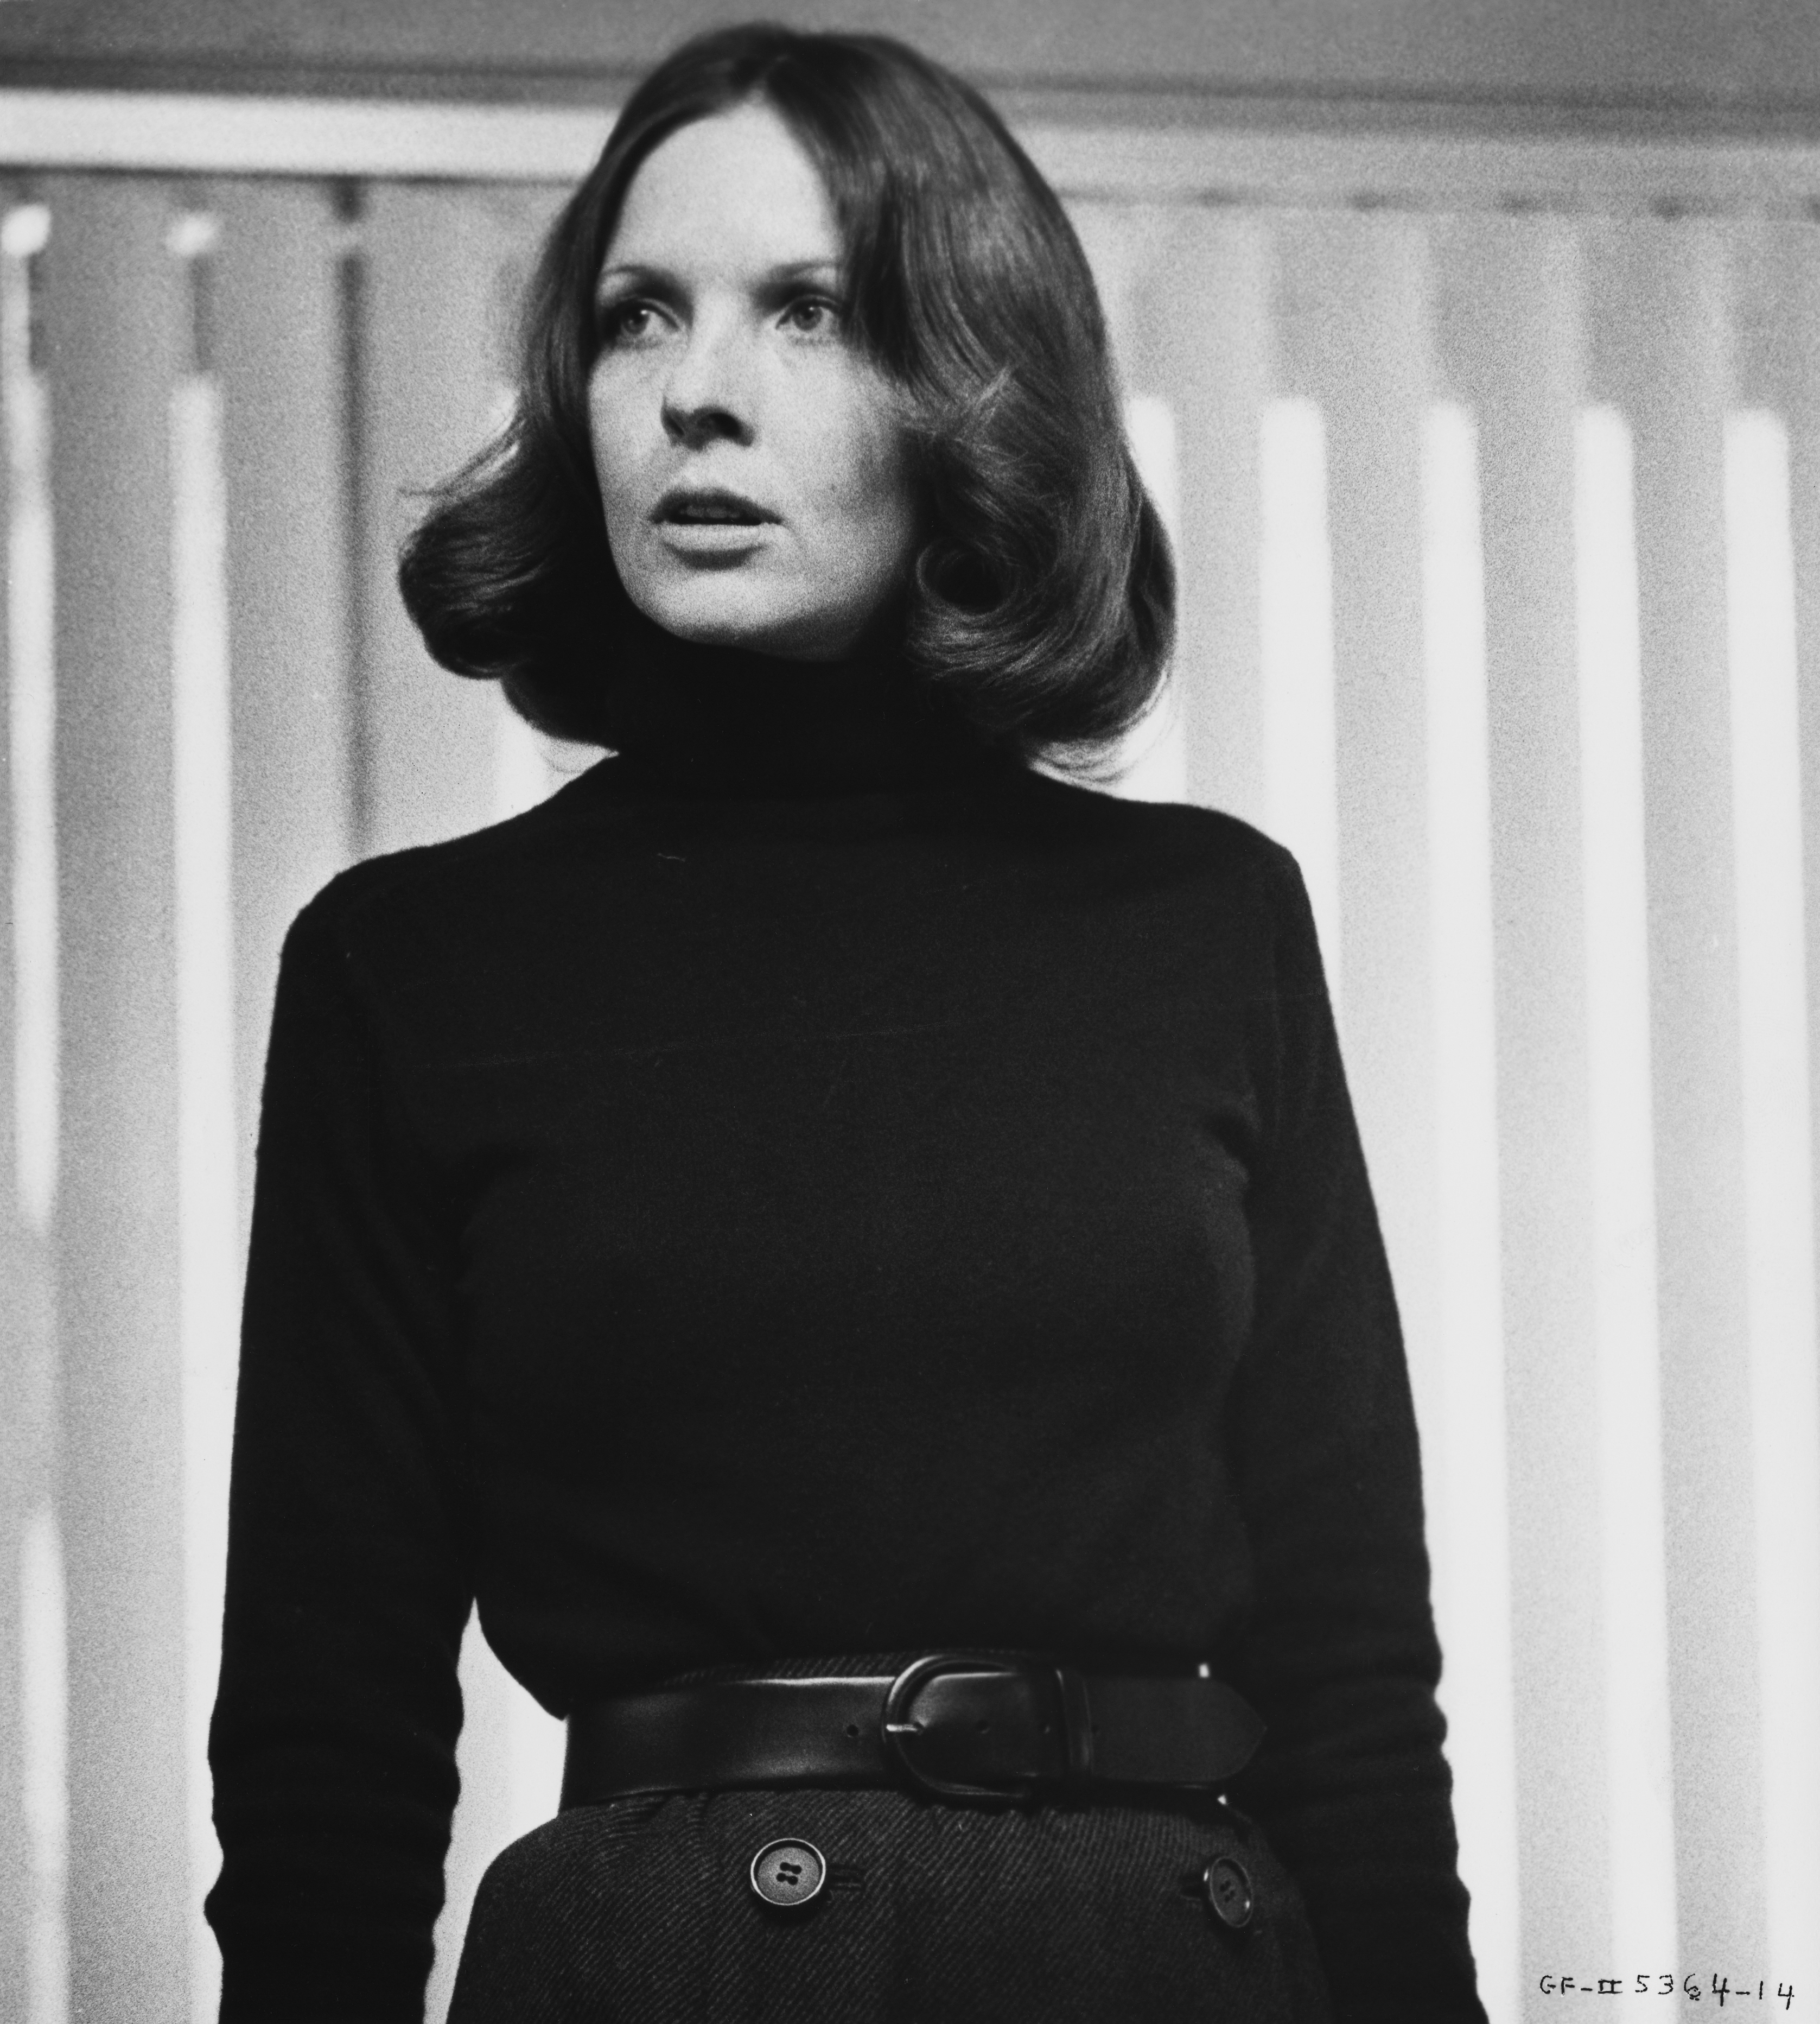 Diane Keaton in a scene from "The Godfather: Part II" in 1974 | Source: Getty Images